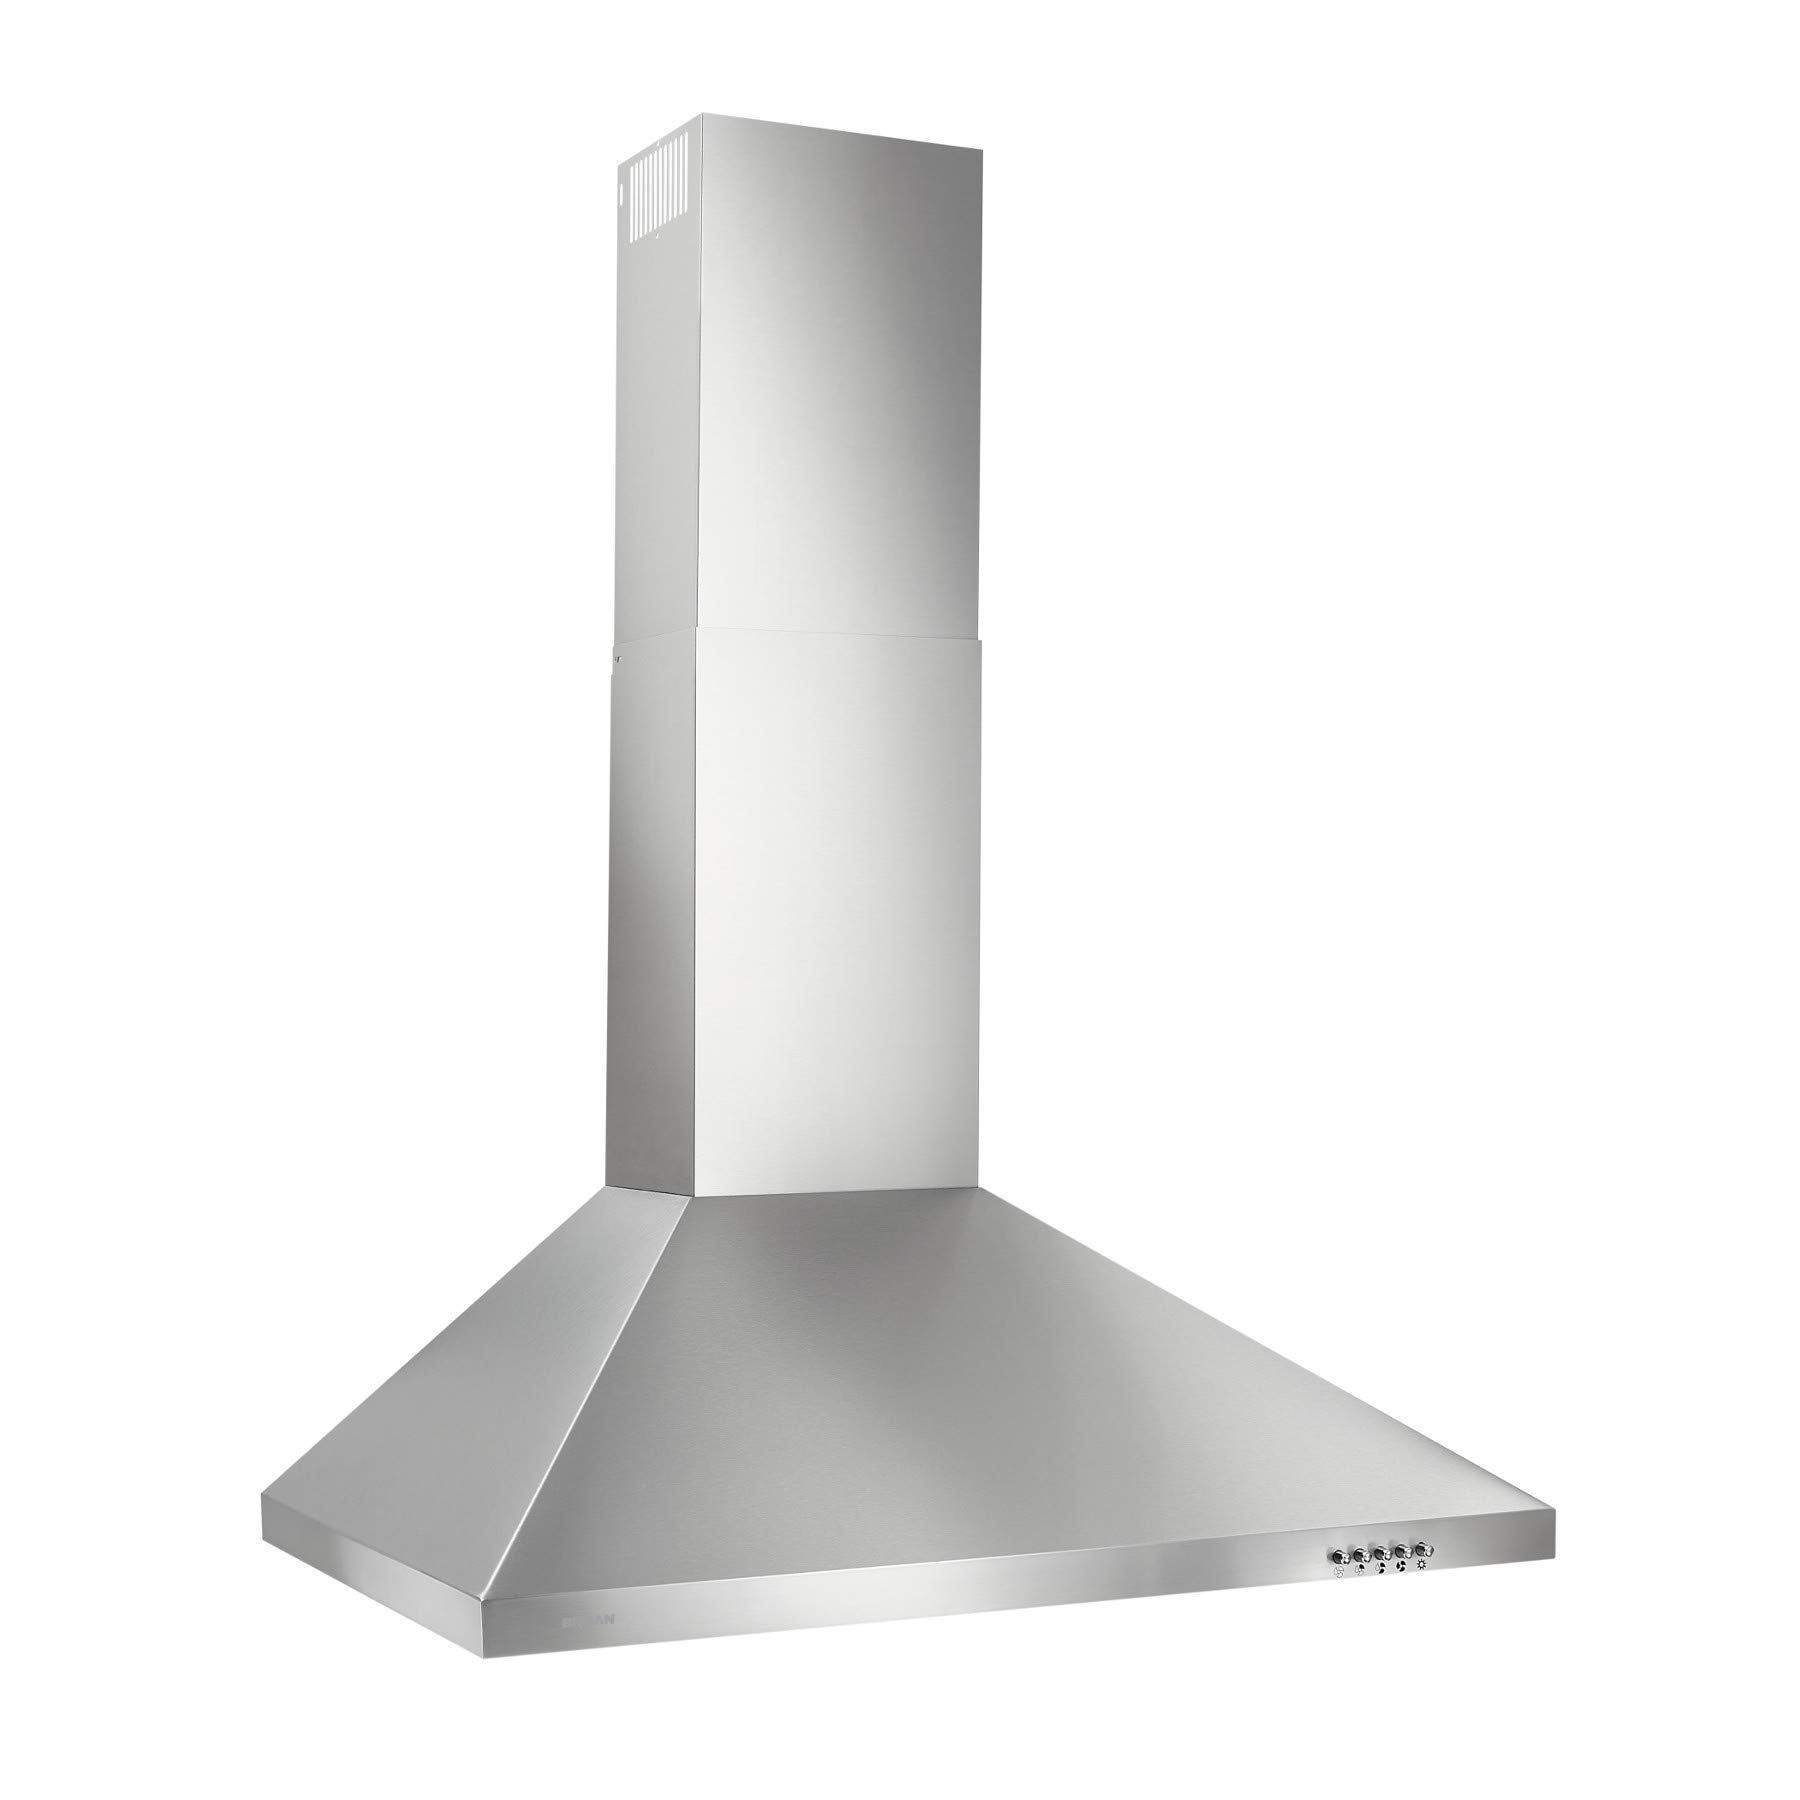 Broan-NuTone BW5030SSL Stainless Steel LED 30-inch Wall-Mount convertible chimney-Style Range Hood with 3-Speed Exhaust Fan and